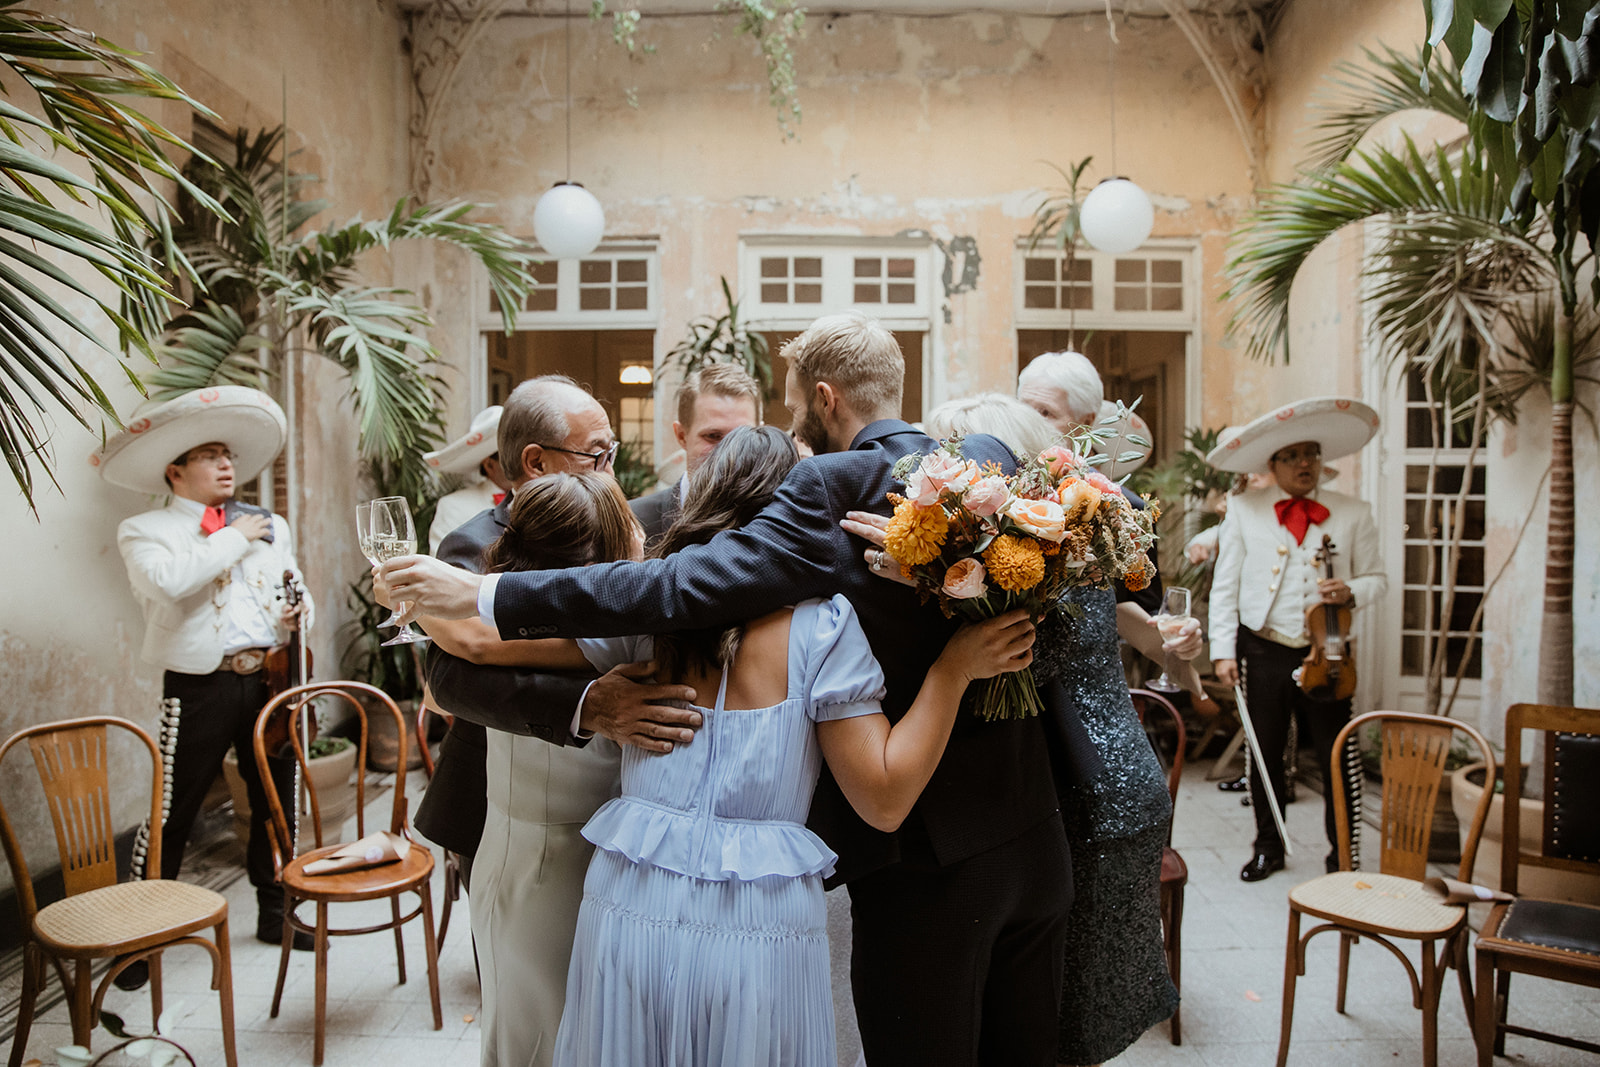 Guests party together and share a group hug during the dreamy Sobremesa wedding